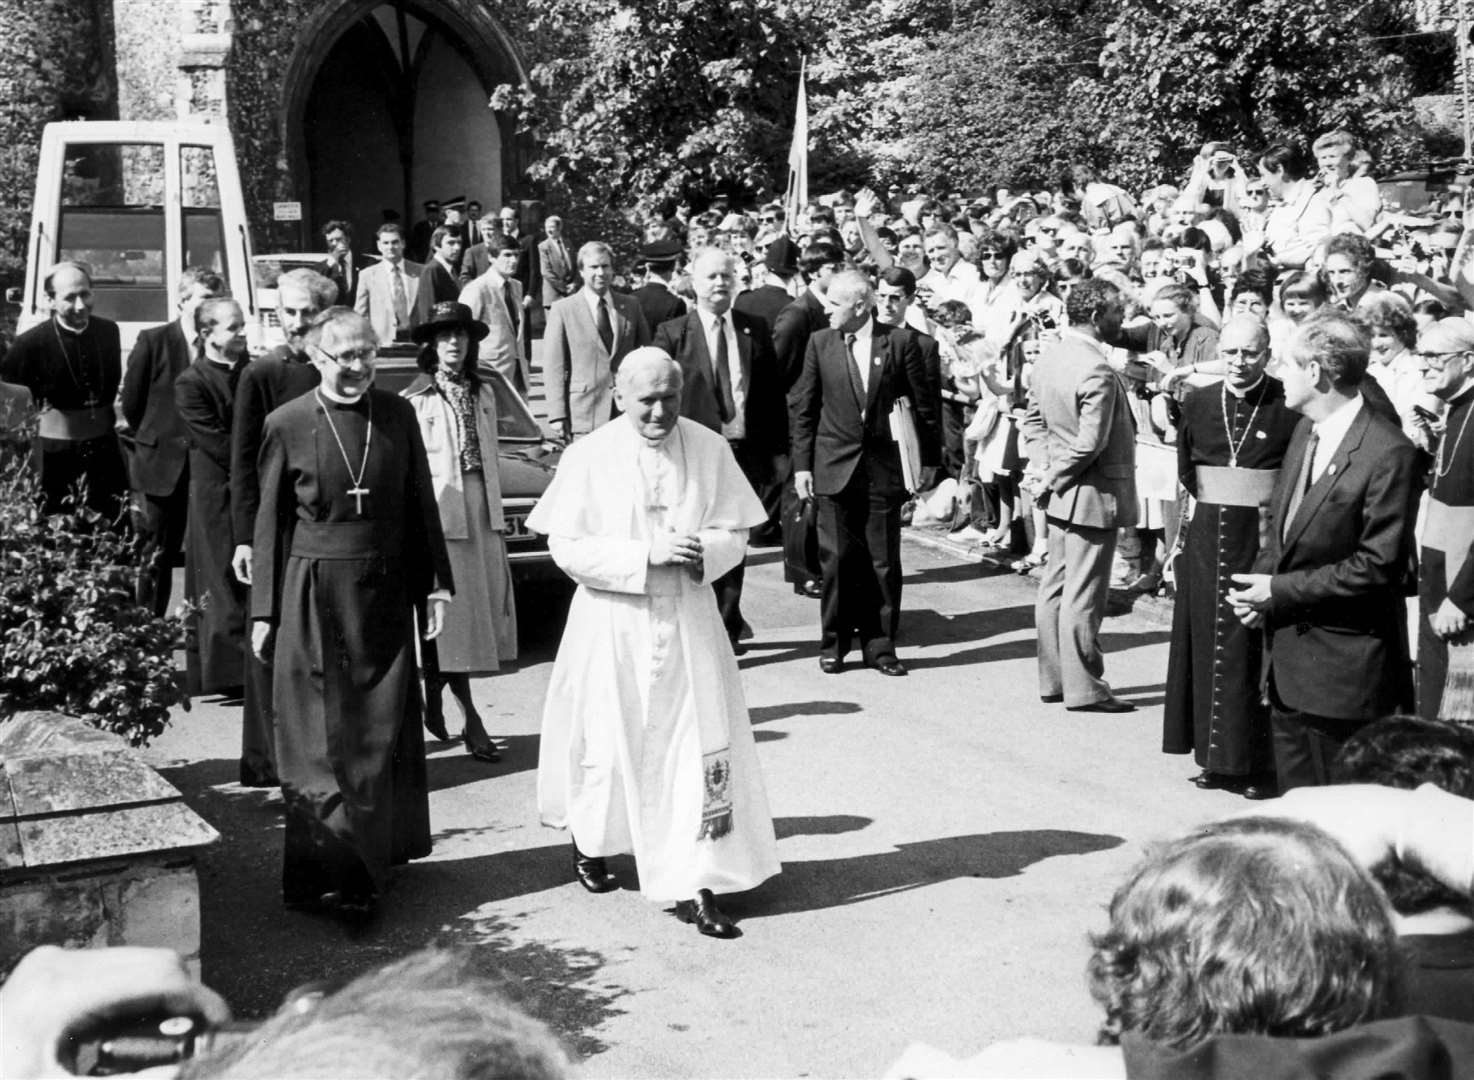 The Pope during his visit to Canterbury in 1982